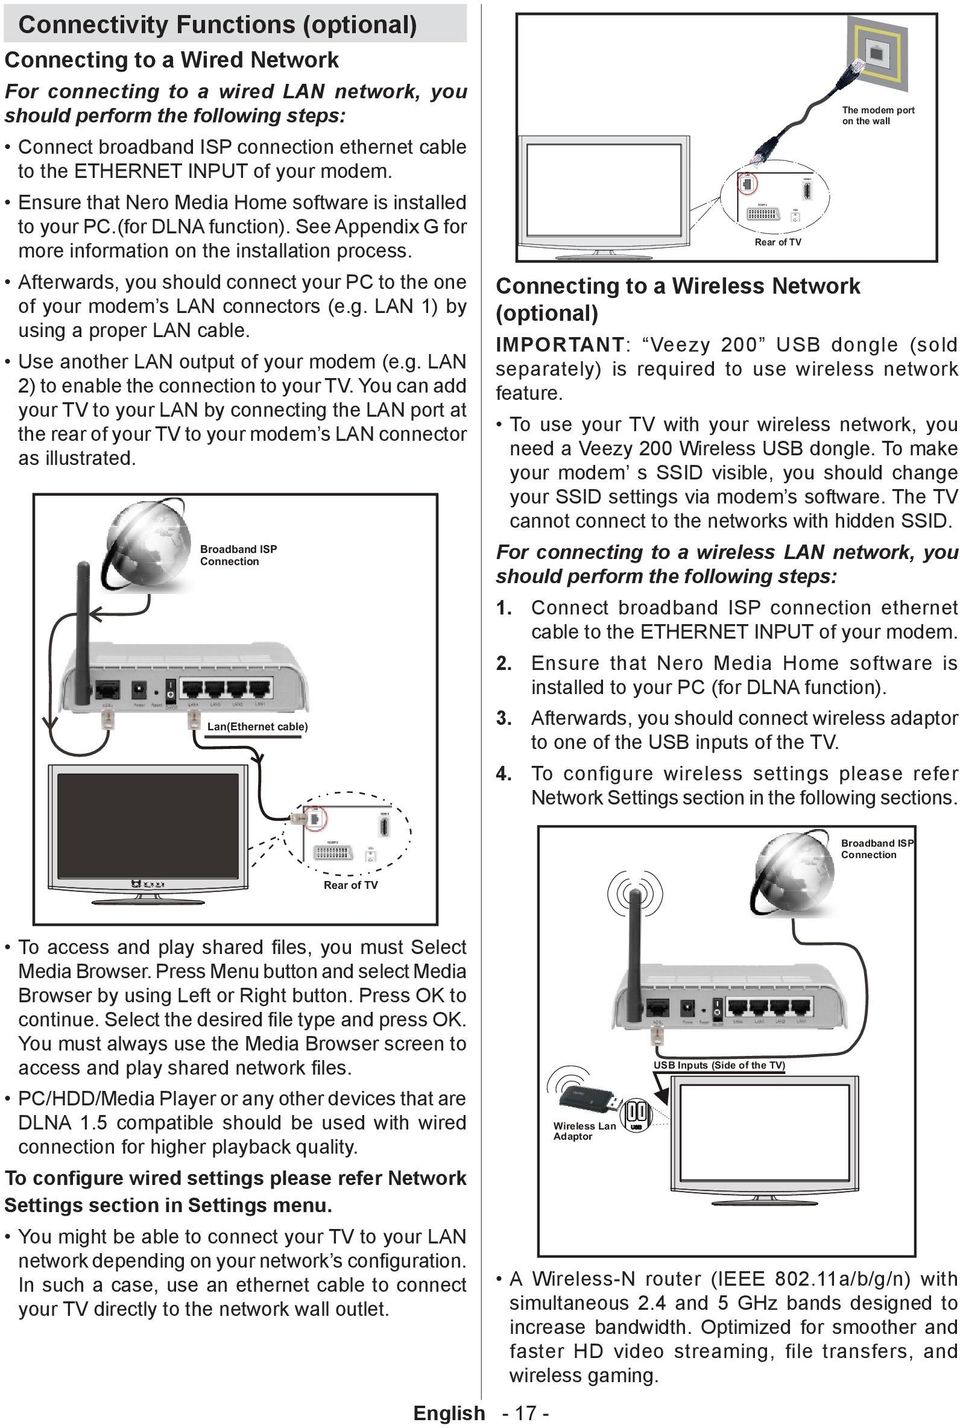 Afterwards, you should connect your PC to the one of your modem s LAN connectors (e.g. LAN 1) by using a proper LAN cable. Use another LAN output of your modem (e.g. LAN 2) to enable the connection to your TV.